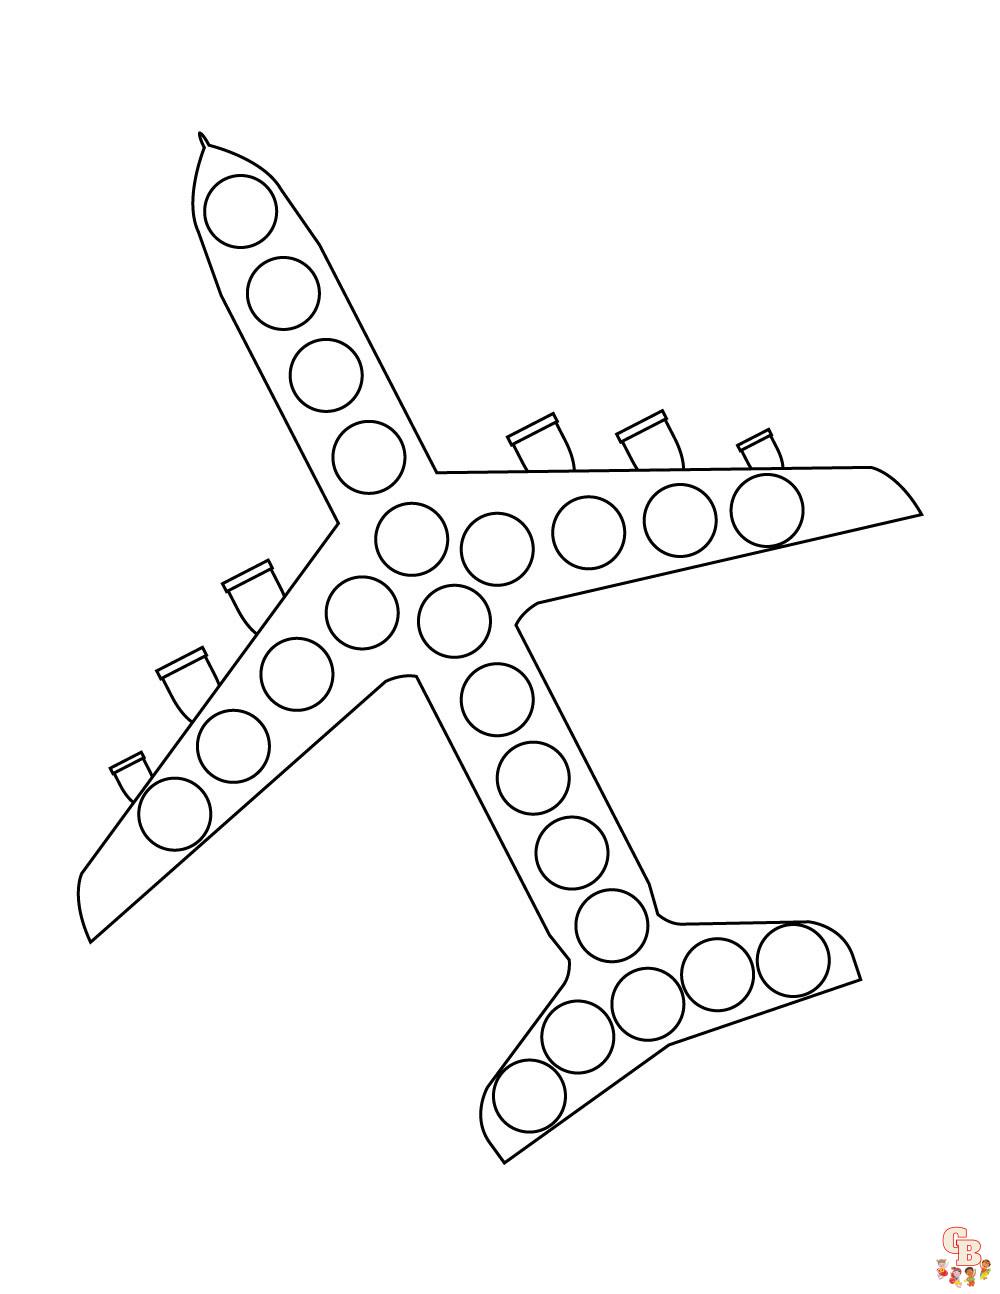 Dot Coloring Pages